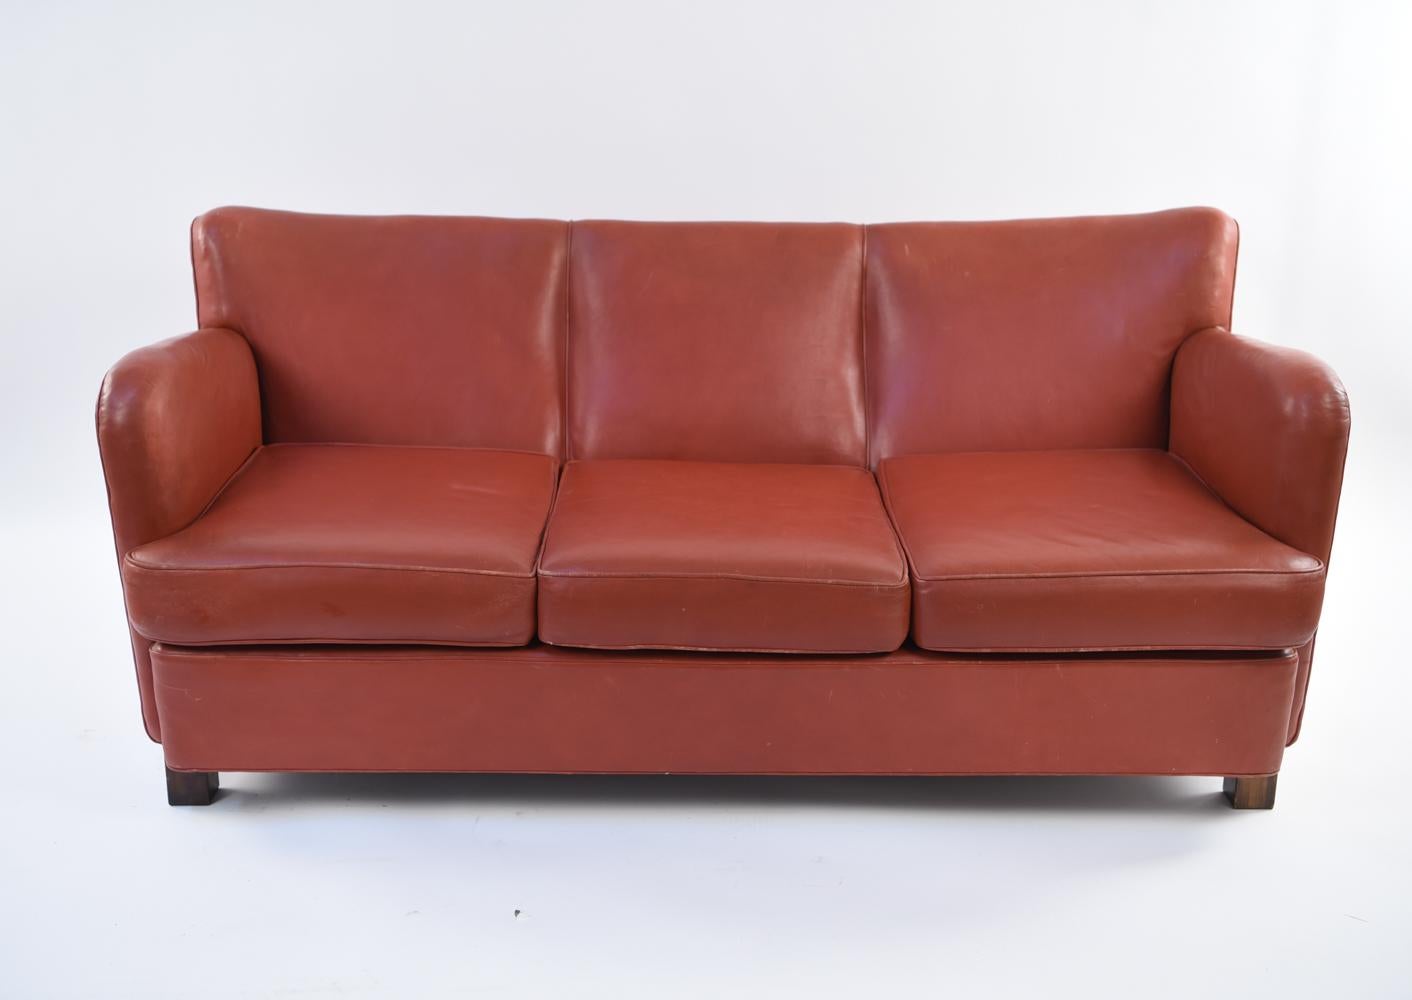 This Danish sofa is a statement piece in the manner of Mogens Lassen with elements of Art Deco style. Upholstered in a tasteful red, this sofa has a bold but sophisticated feel with clean modern lines. A great clean slate to be upholstered to your